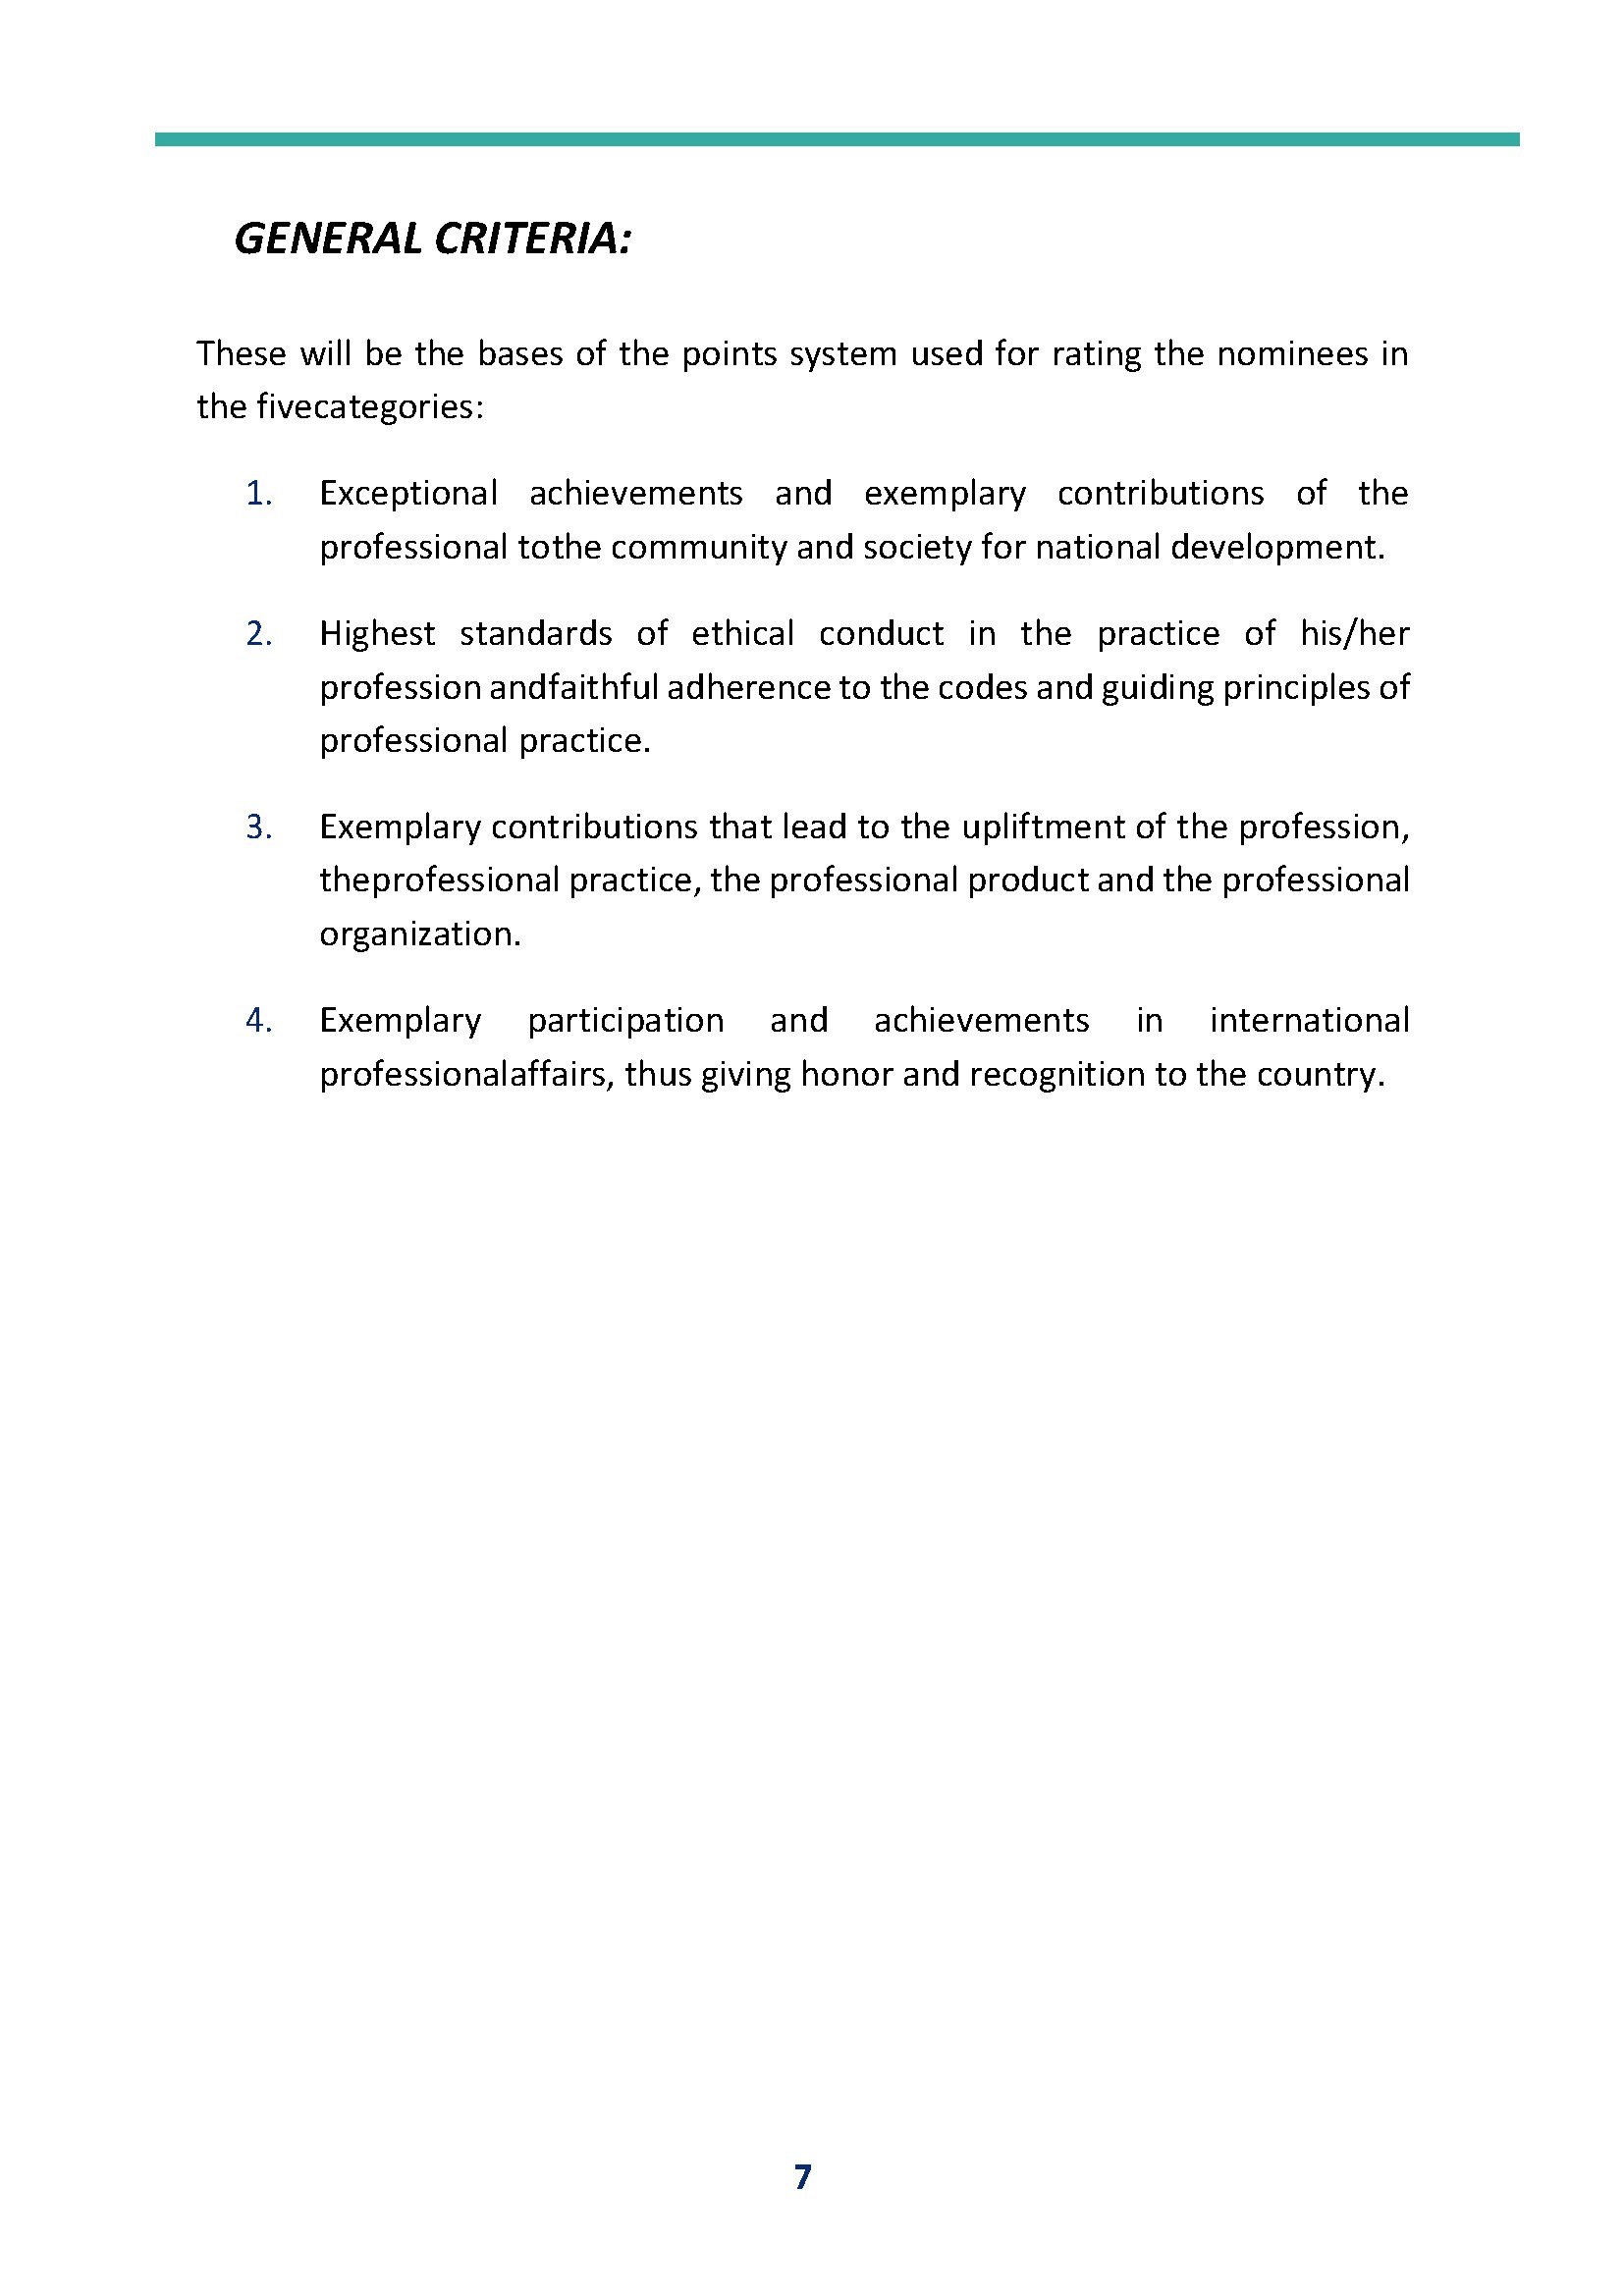 PFPA-Excellence-Awards-Guidelines-new (1)_Page_07.jpg